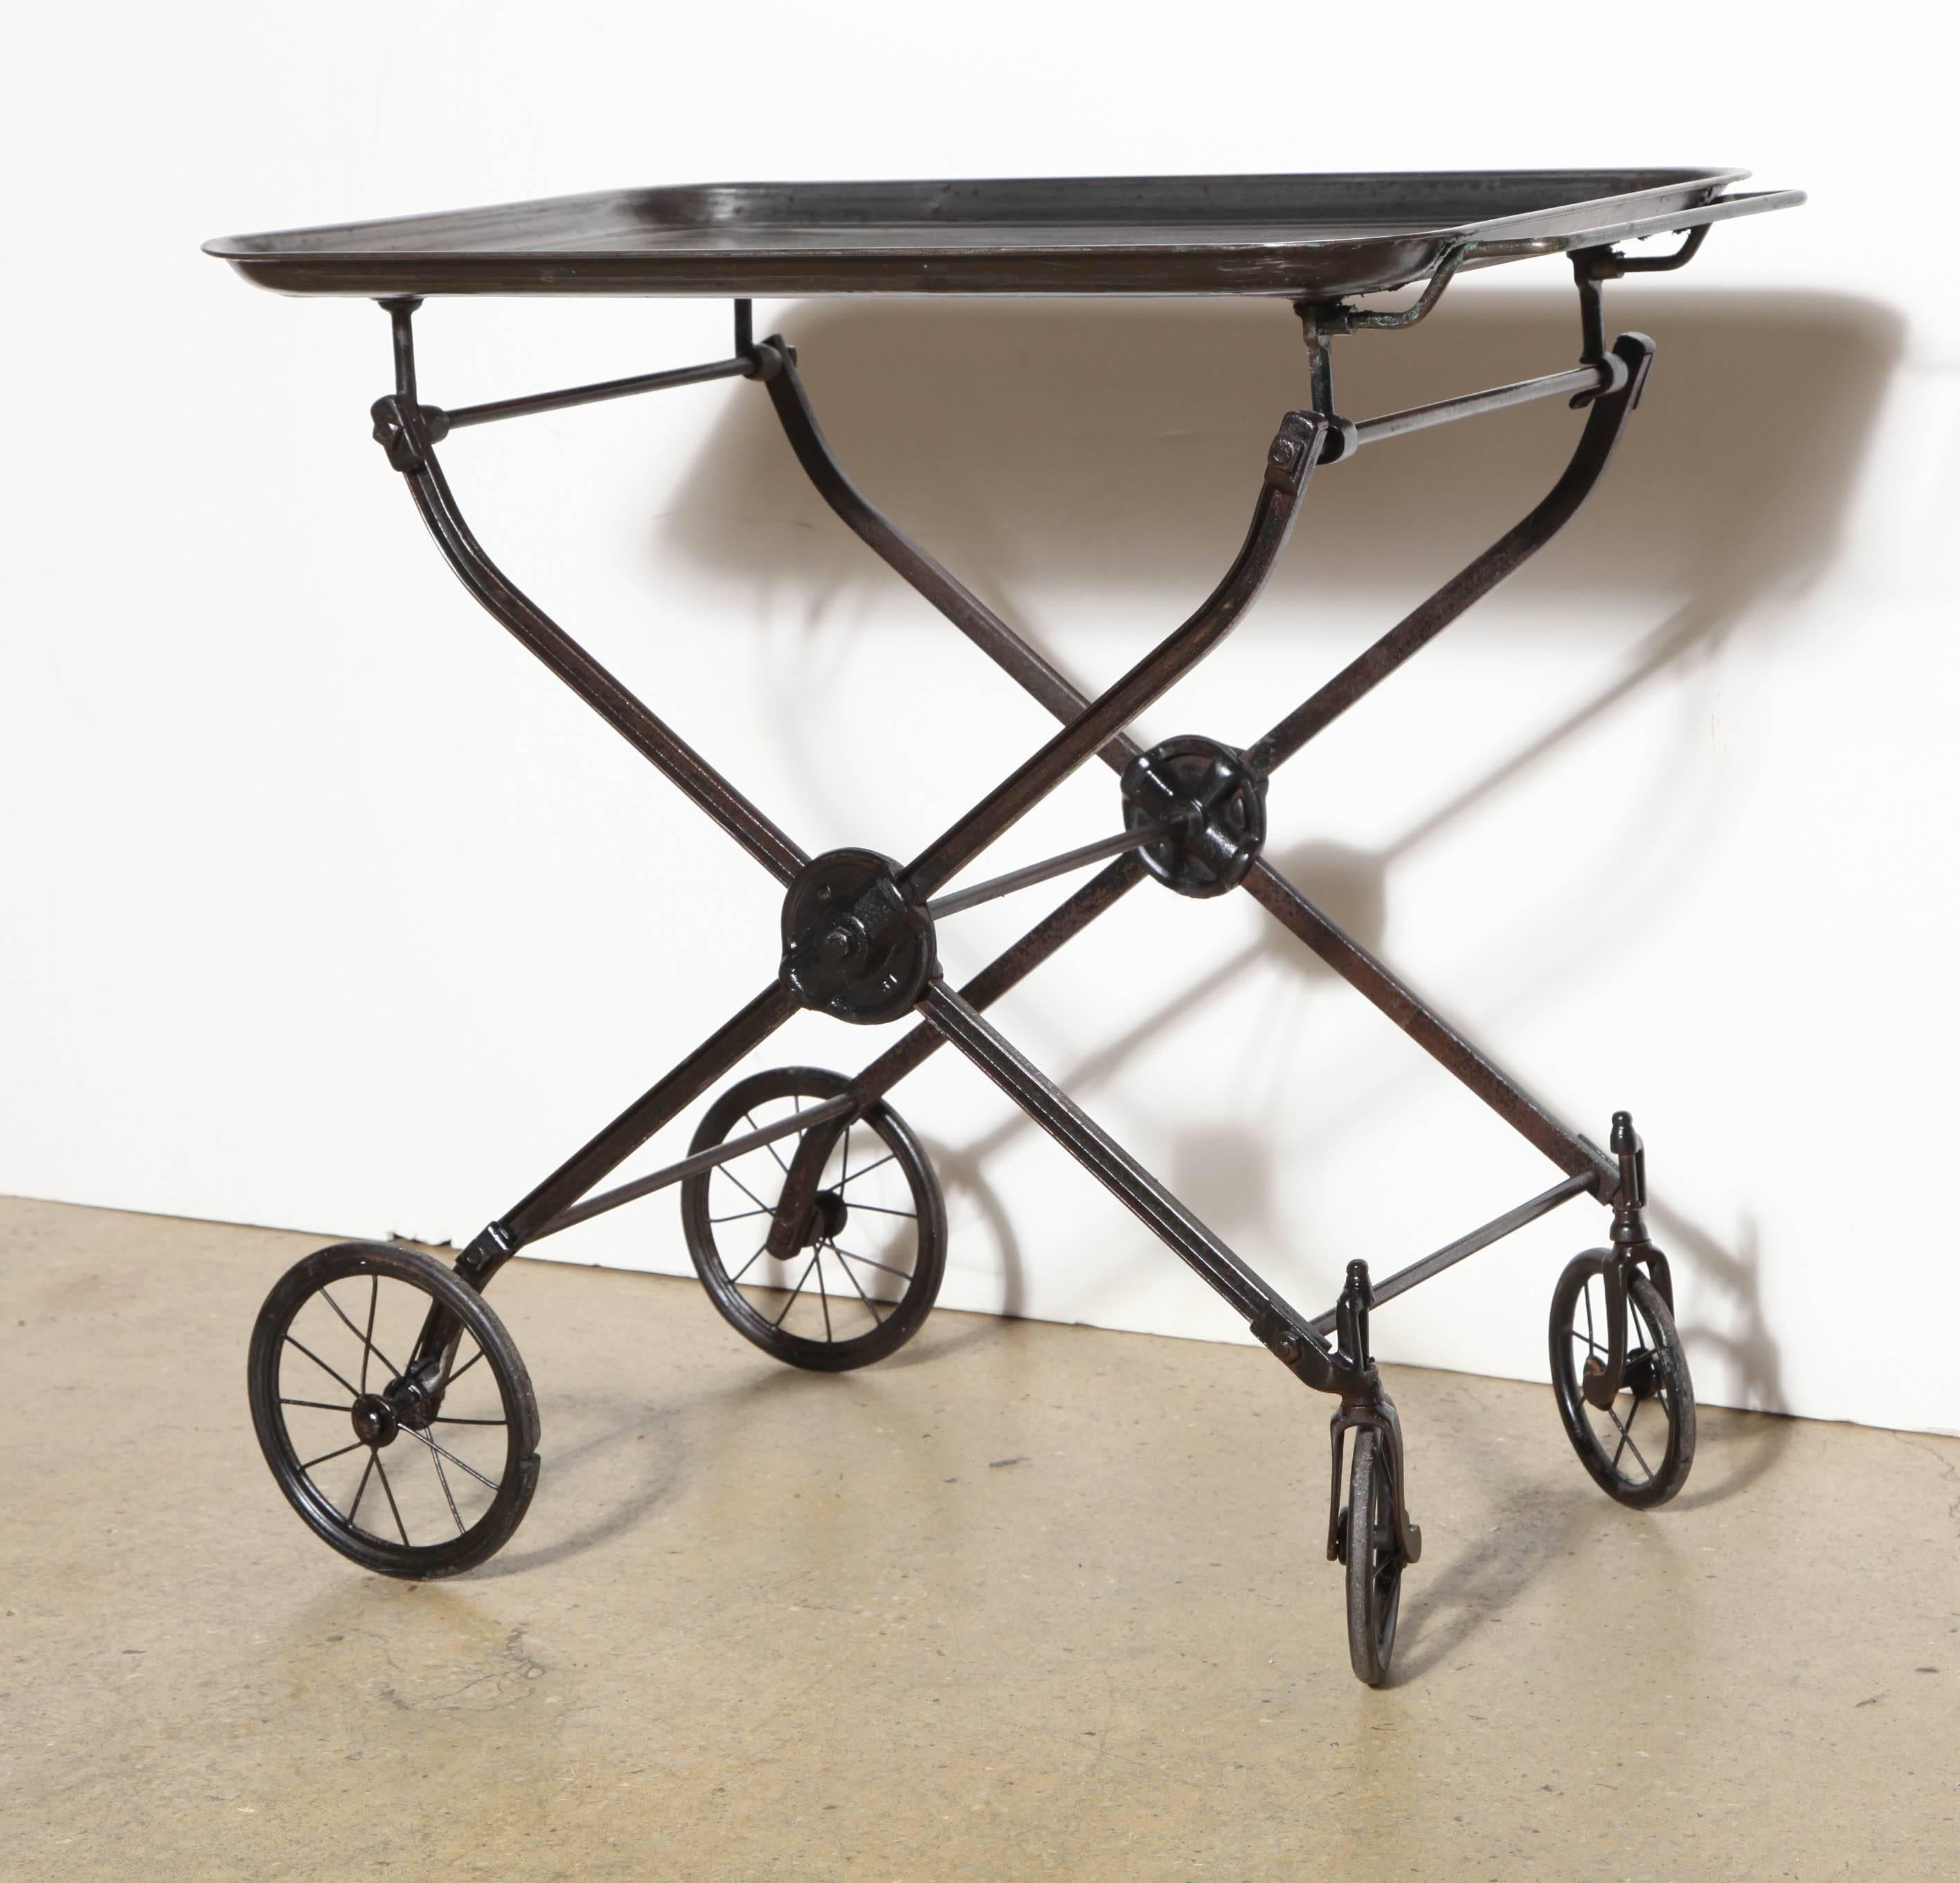 Edwardian Rolling and Folding Black Iron Hotel Beverage Trolley, Occasional Serving Cart, Dry Bar. Featuring Iron casting with spoked wheel detail. Larger lipped tray with handle. Folds for storage. Industrial. Sturdy. Fine design. Versatile.